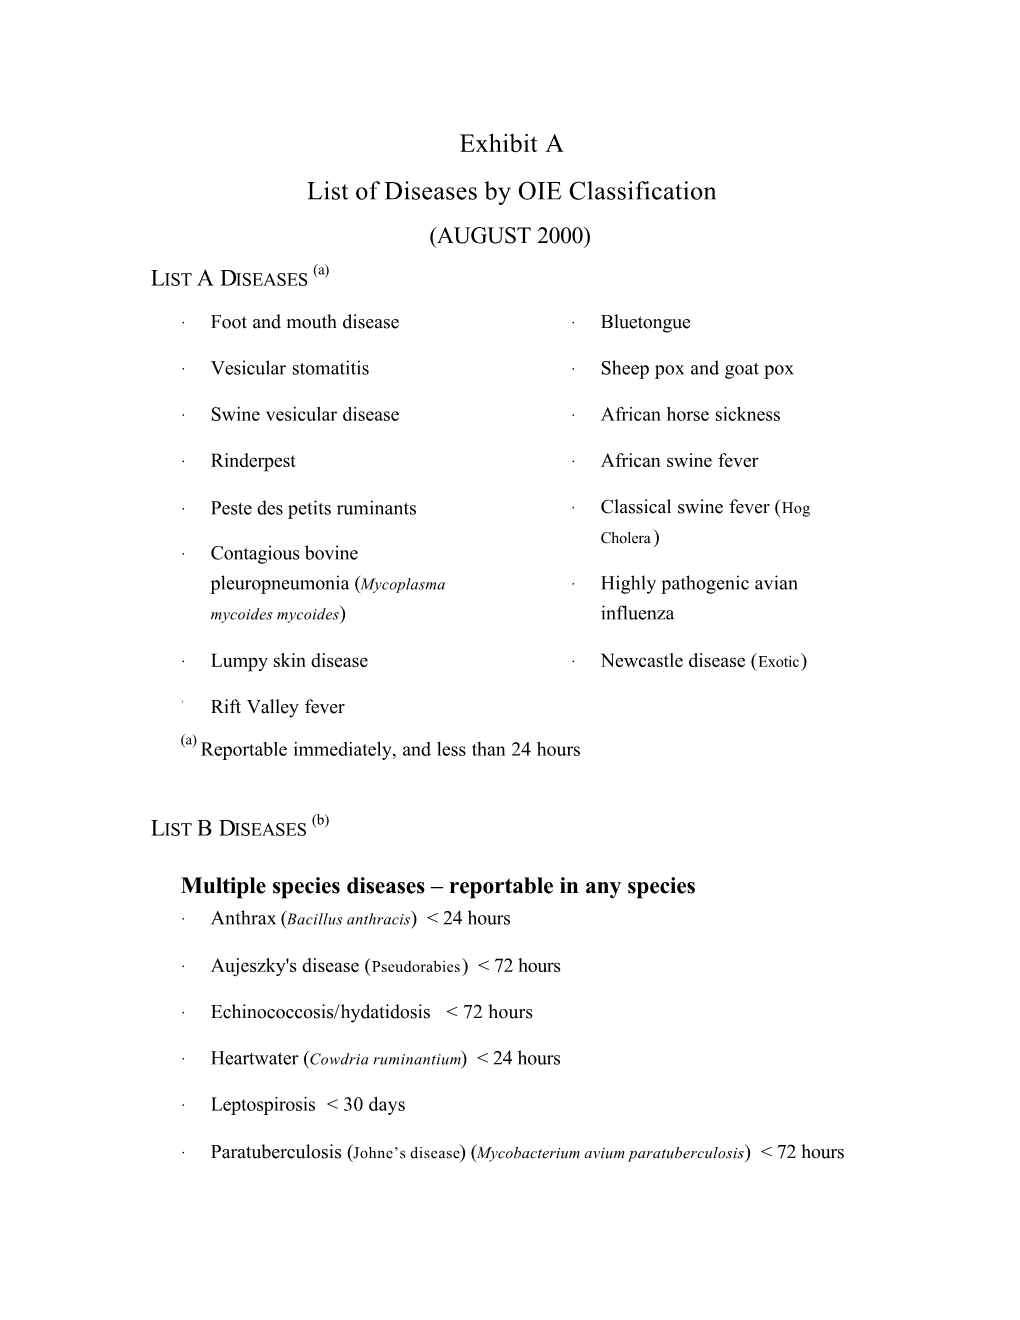 Exhibit a List of Diseases by OIE Classification (AUGUST 2000) (A) LIST a DISEASES